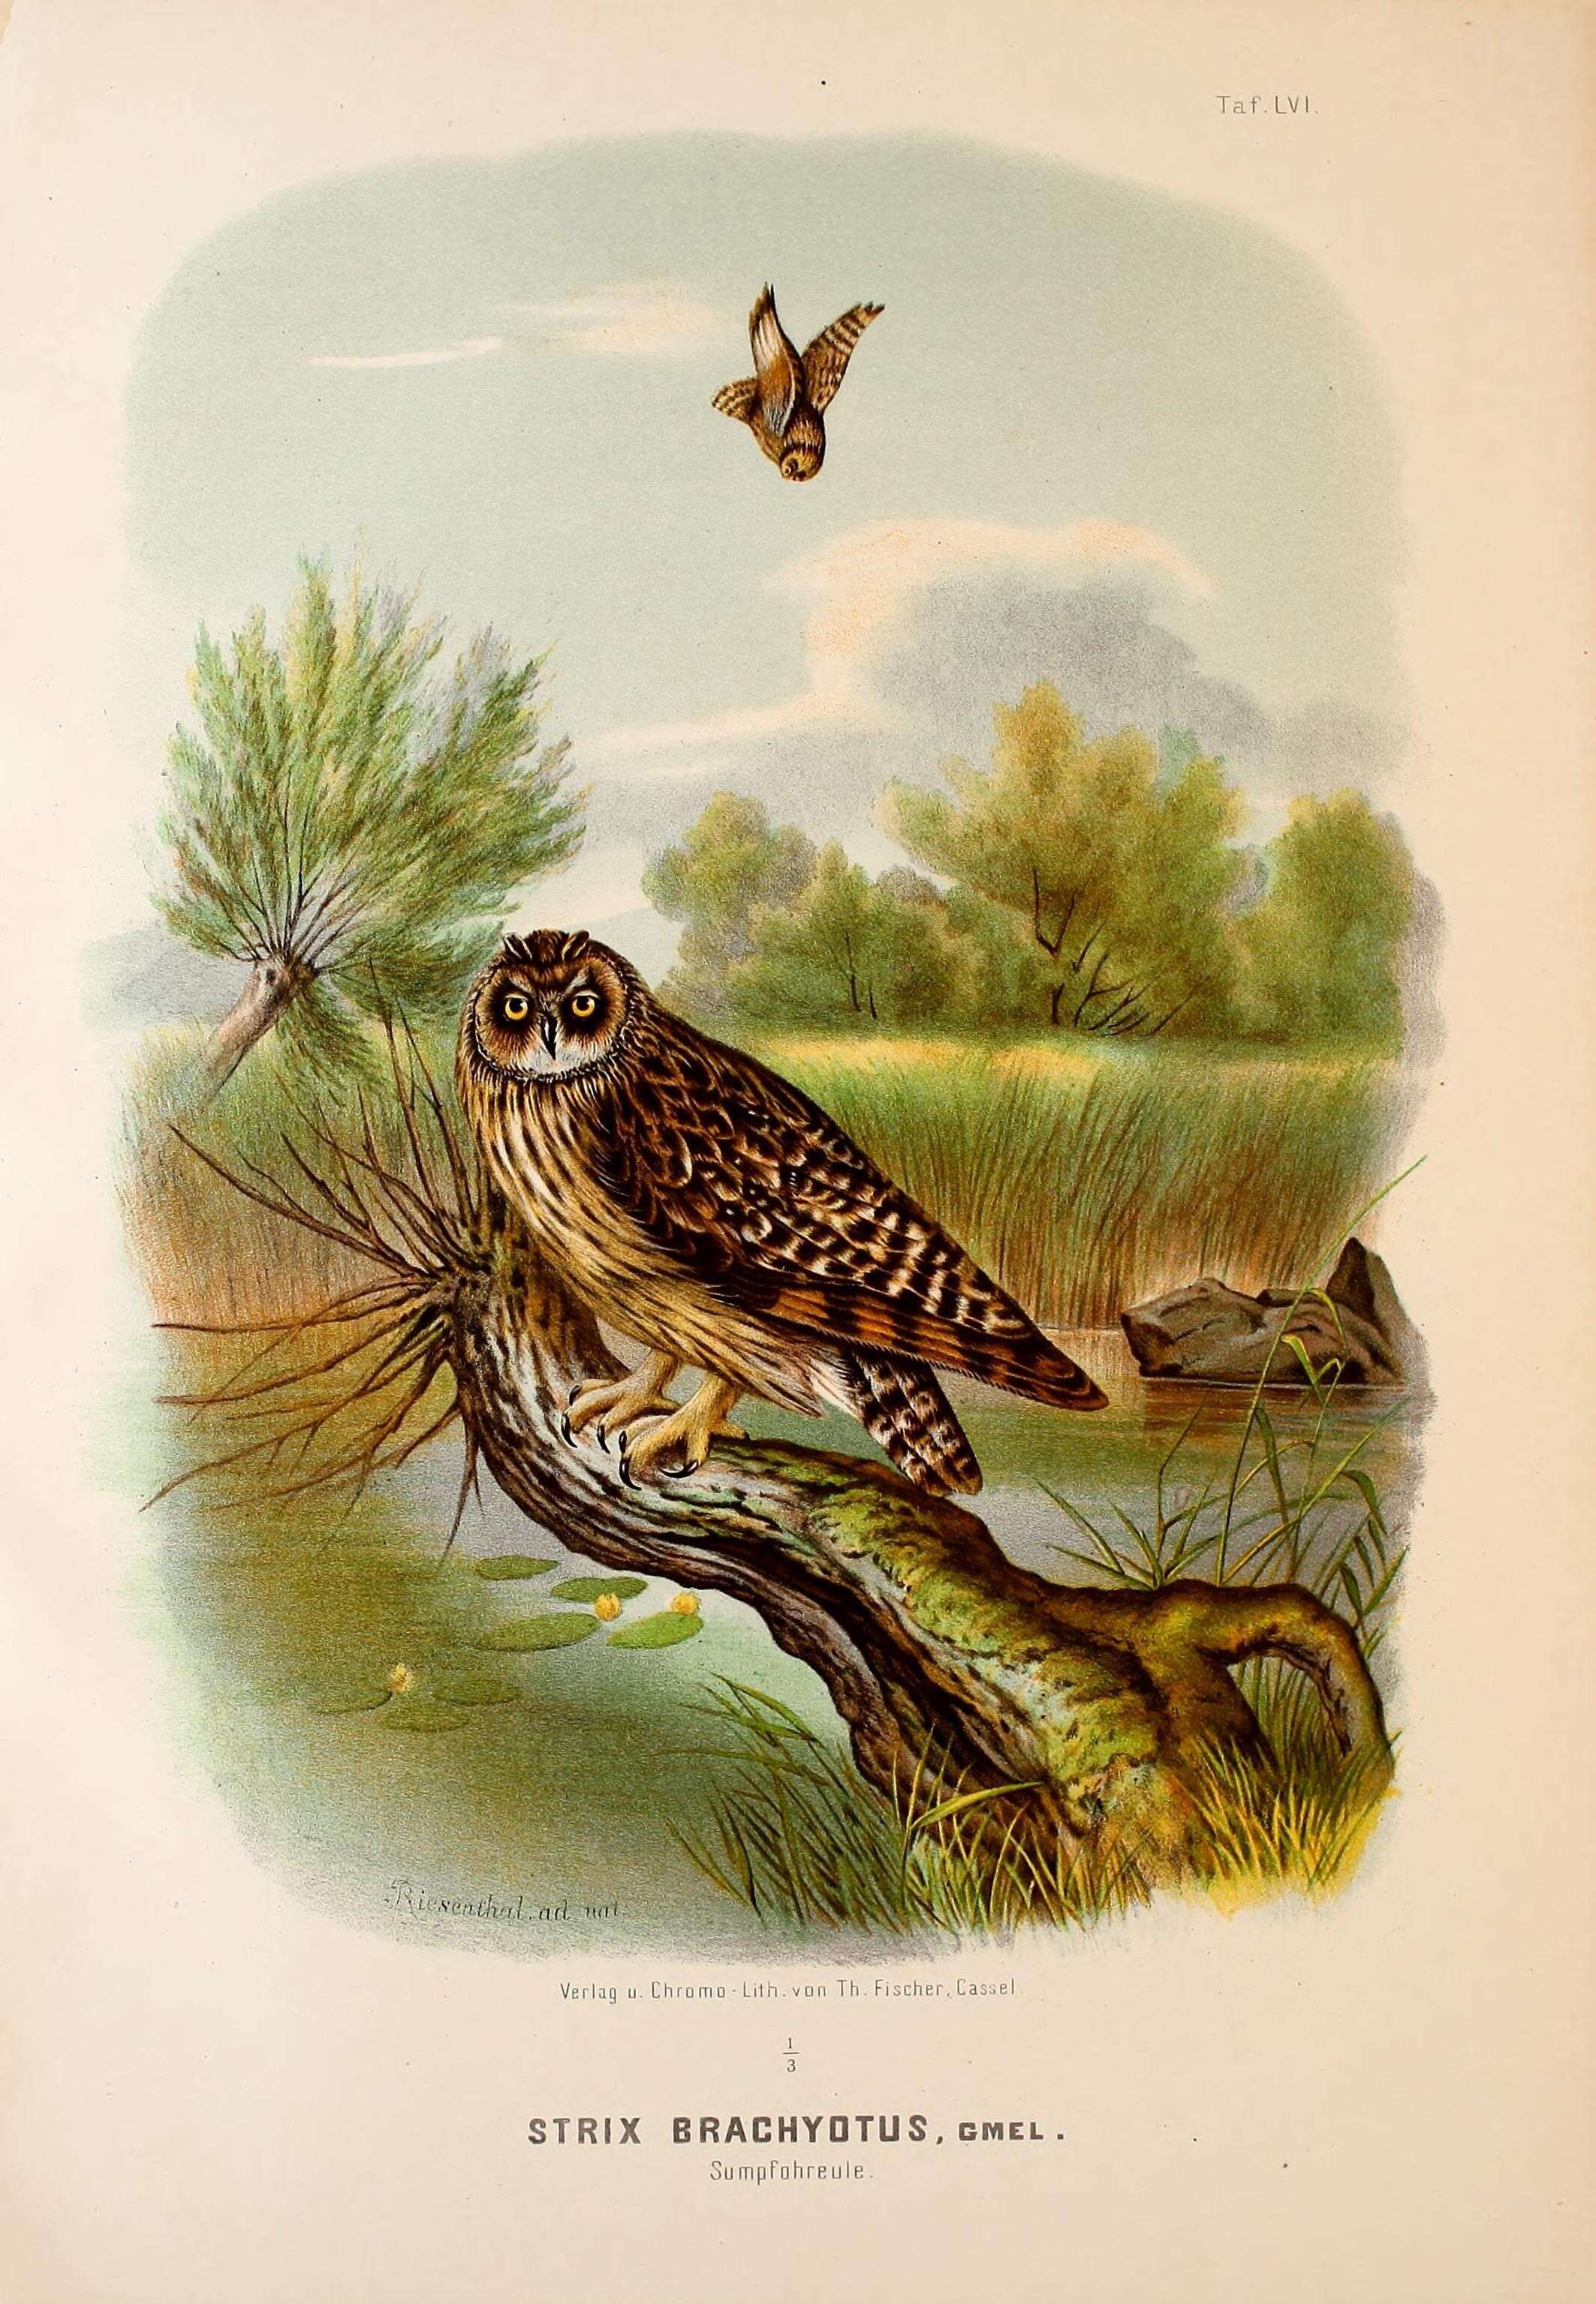 Image of Short-eared Owl